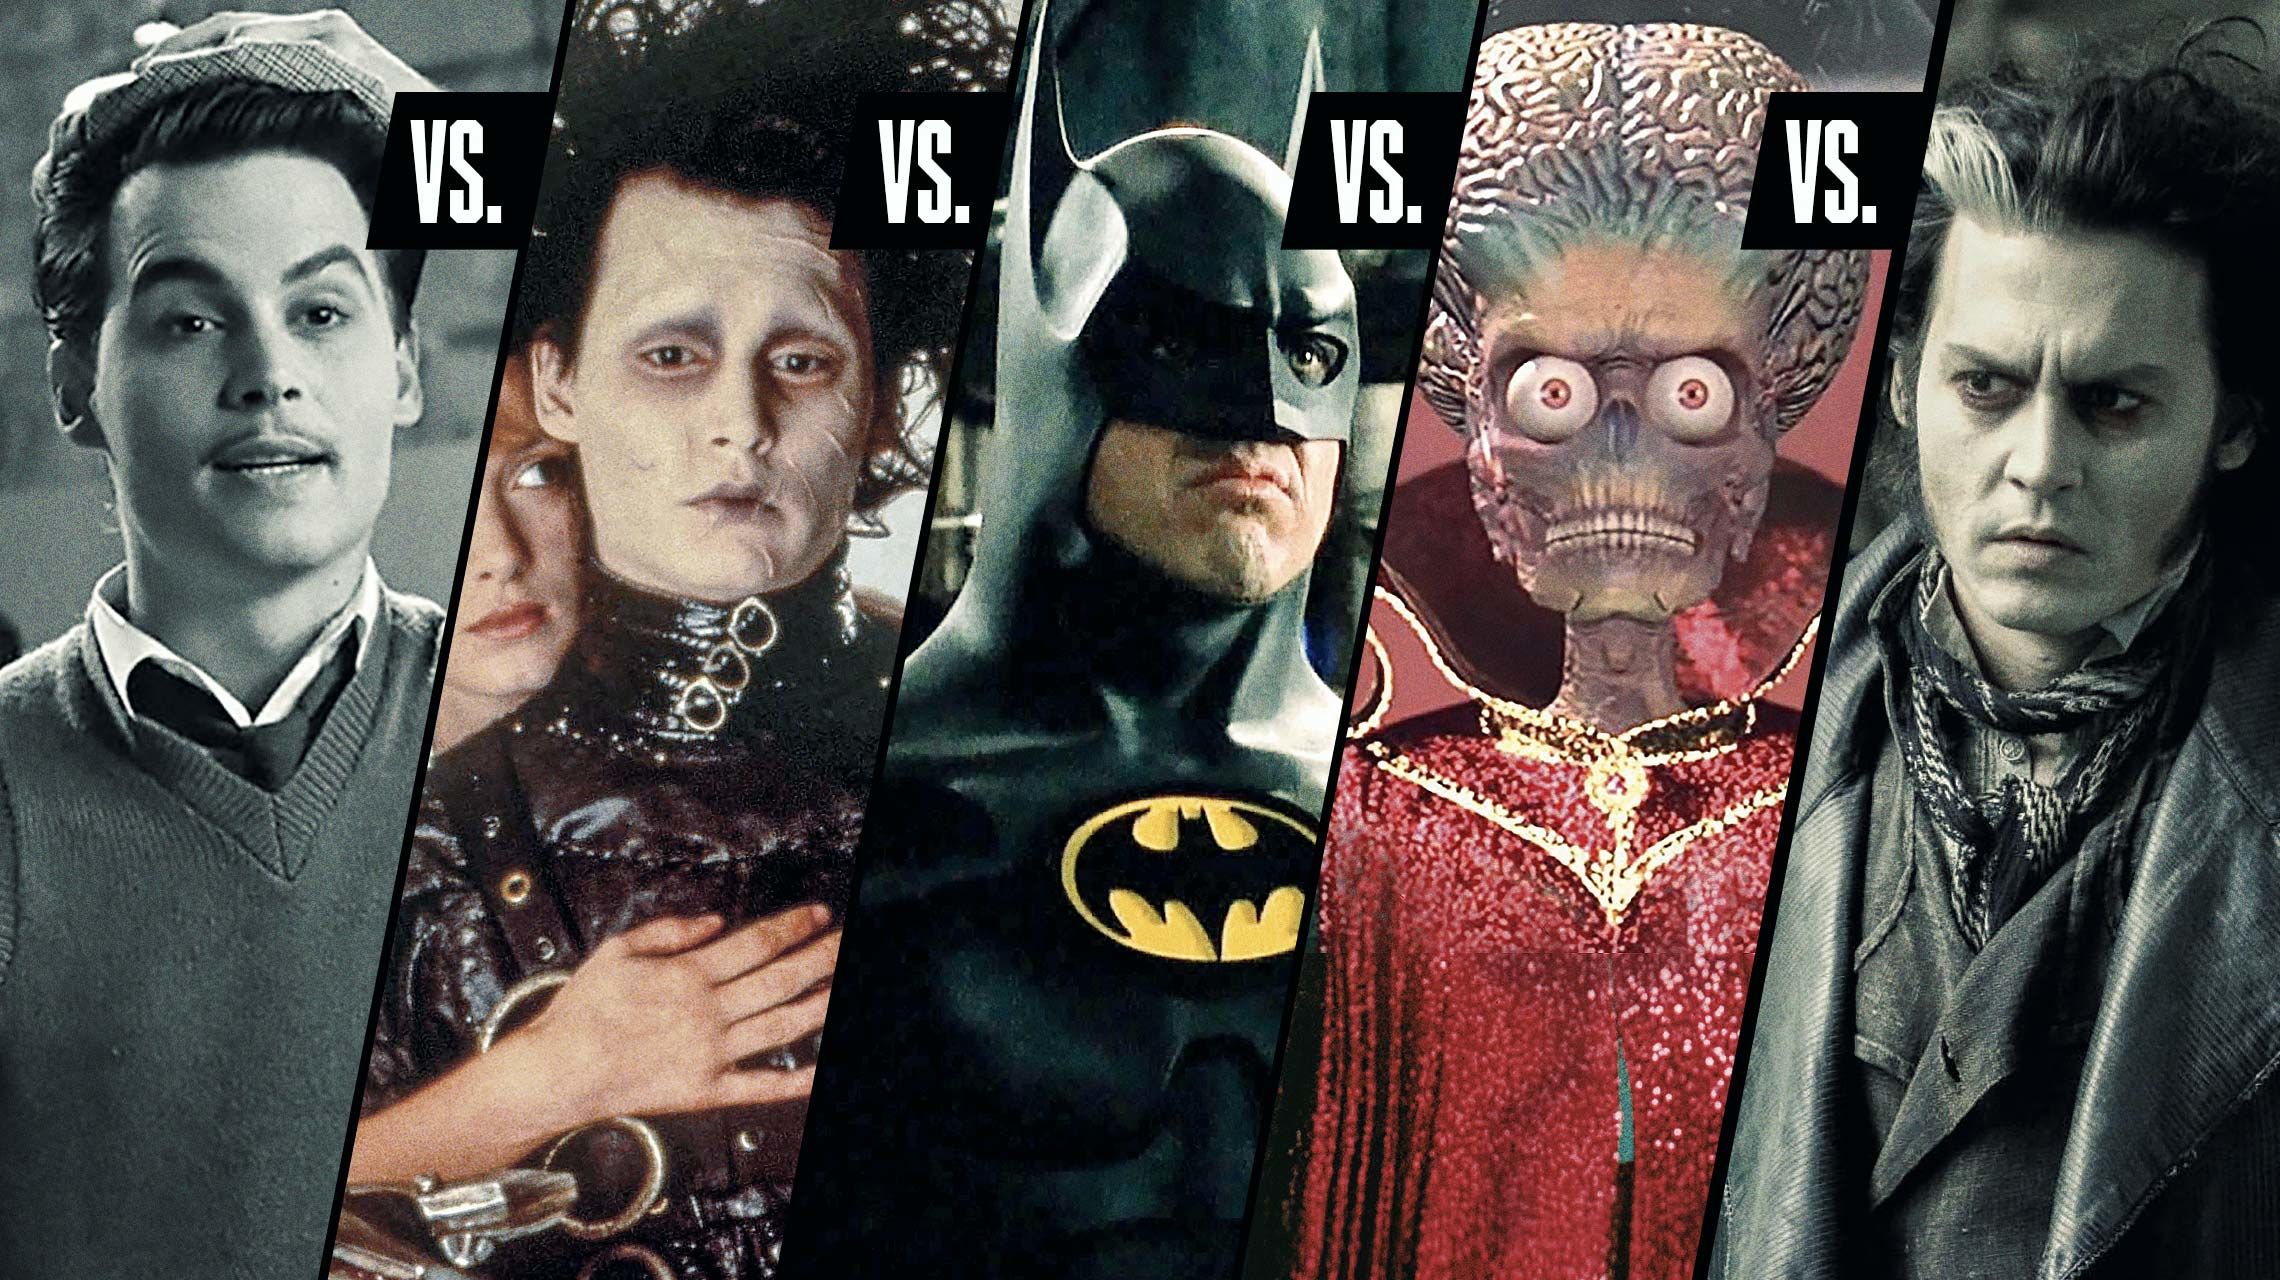 Tim Burton's best movies the '90s and '00s | SYFY WIRE